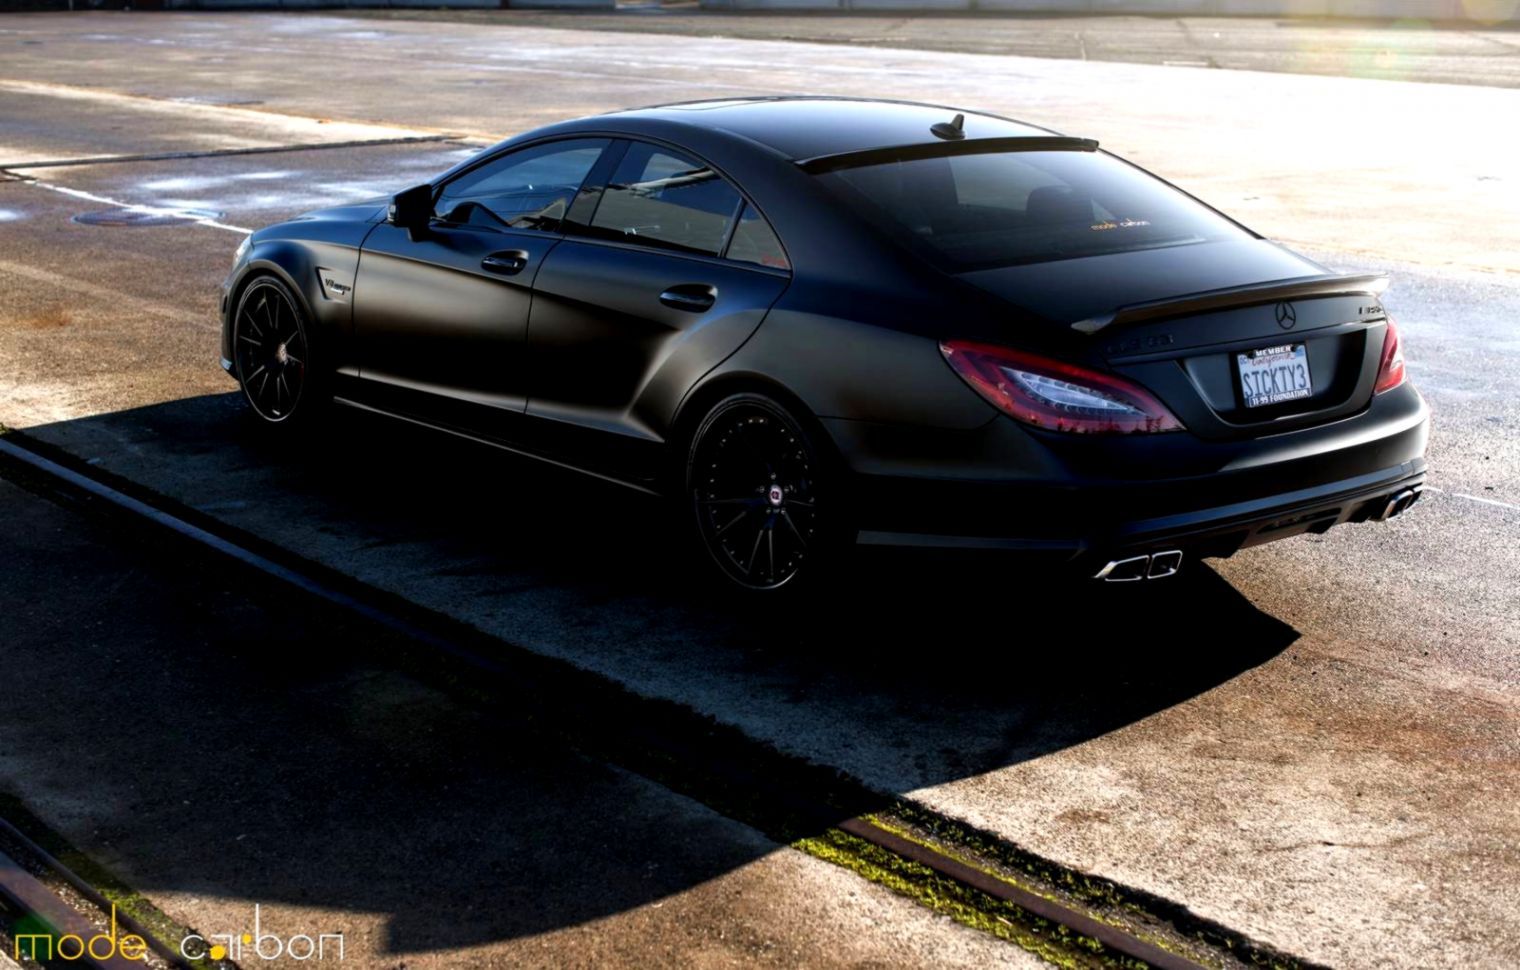 Mercedes Benz Cls 63 Latest Hd Wallpapers Free Download